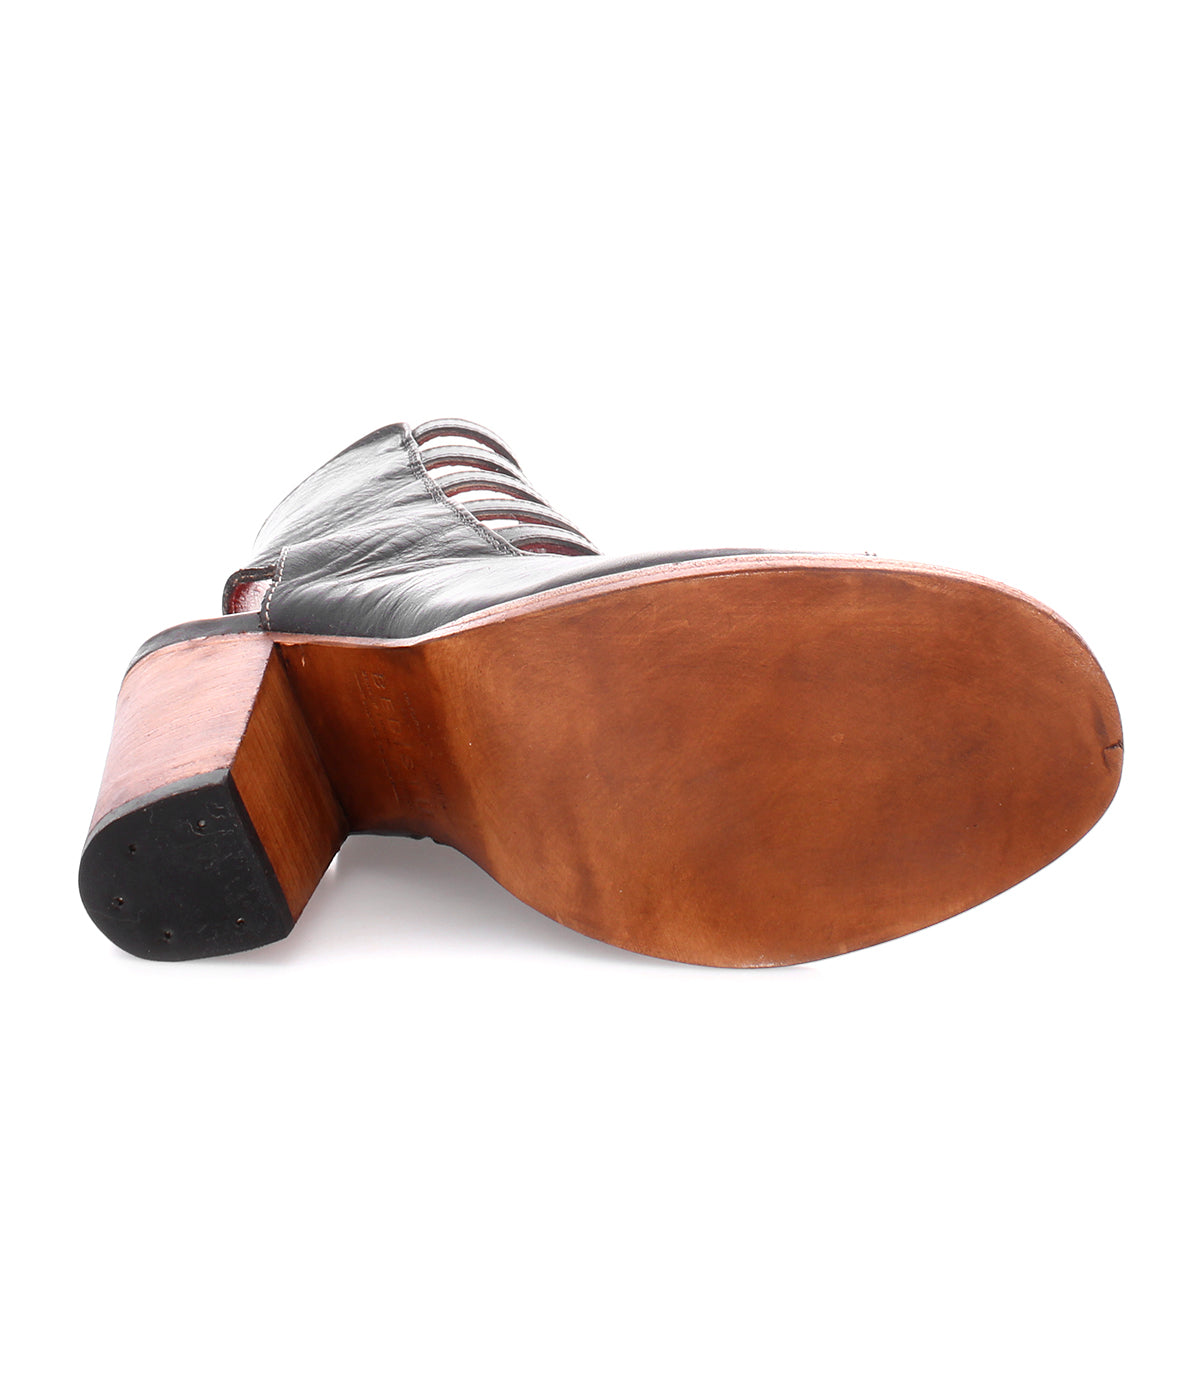 The back of a black leather peep-toe Occam heel with a wooden sole from Bed Stu.